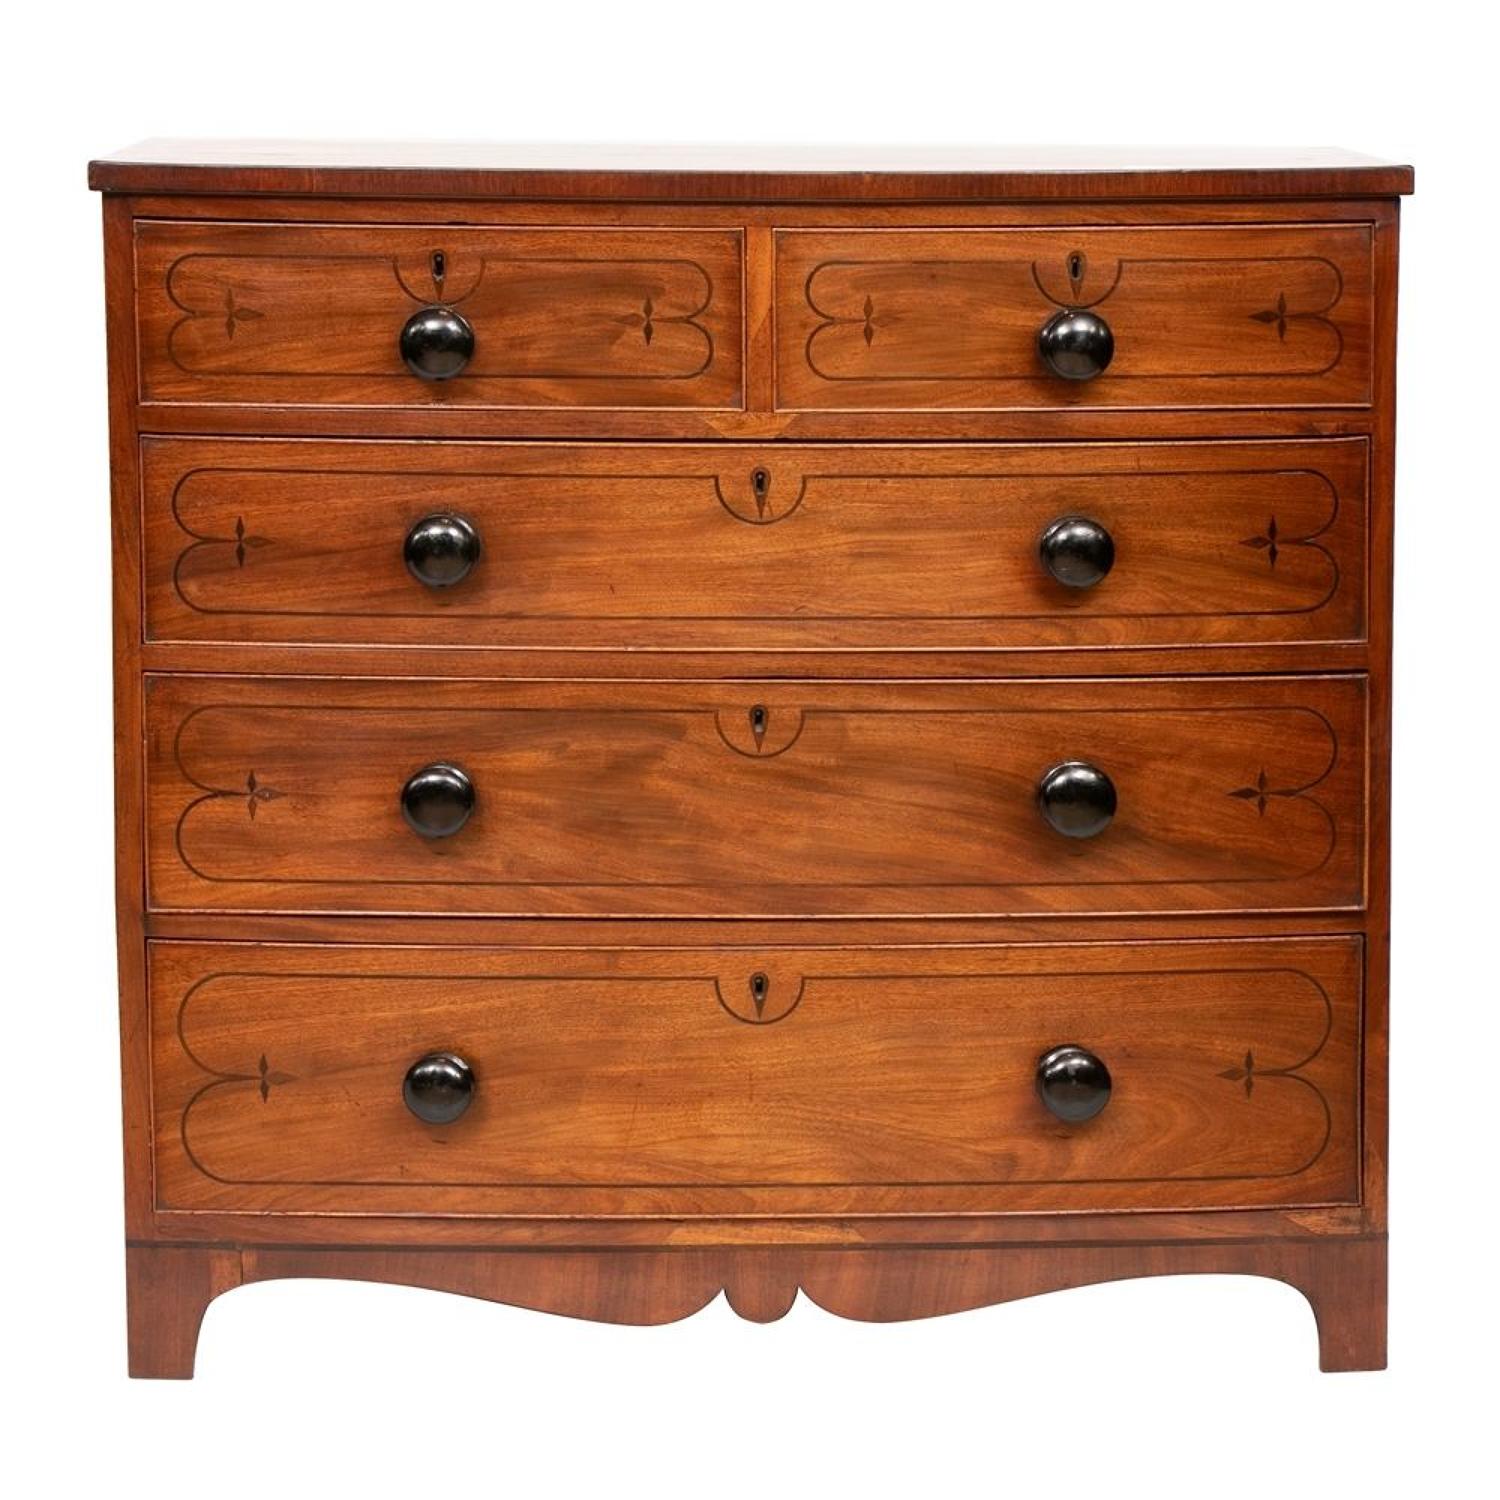 Regency Mahogany Chest of Drawers with Decorative Marquetry